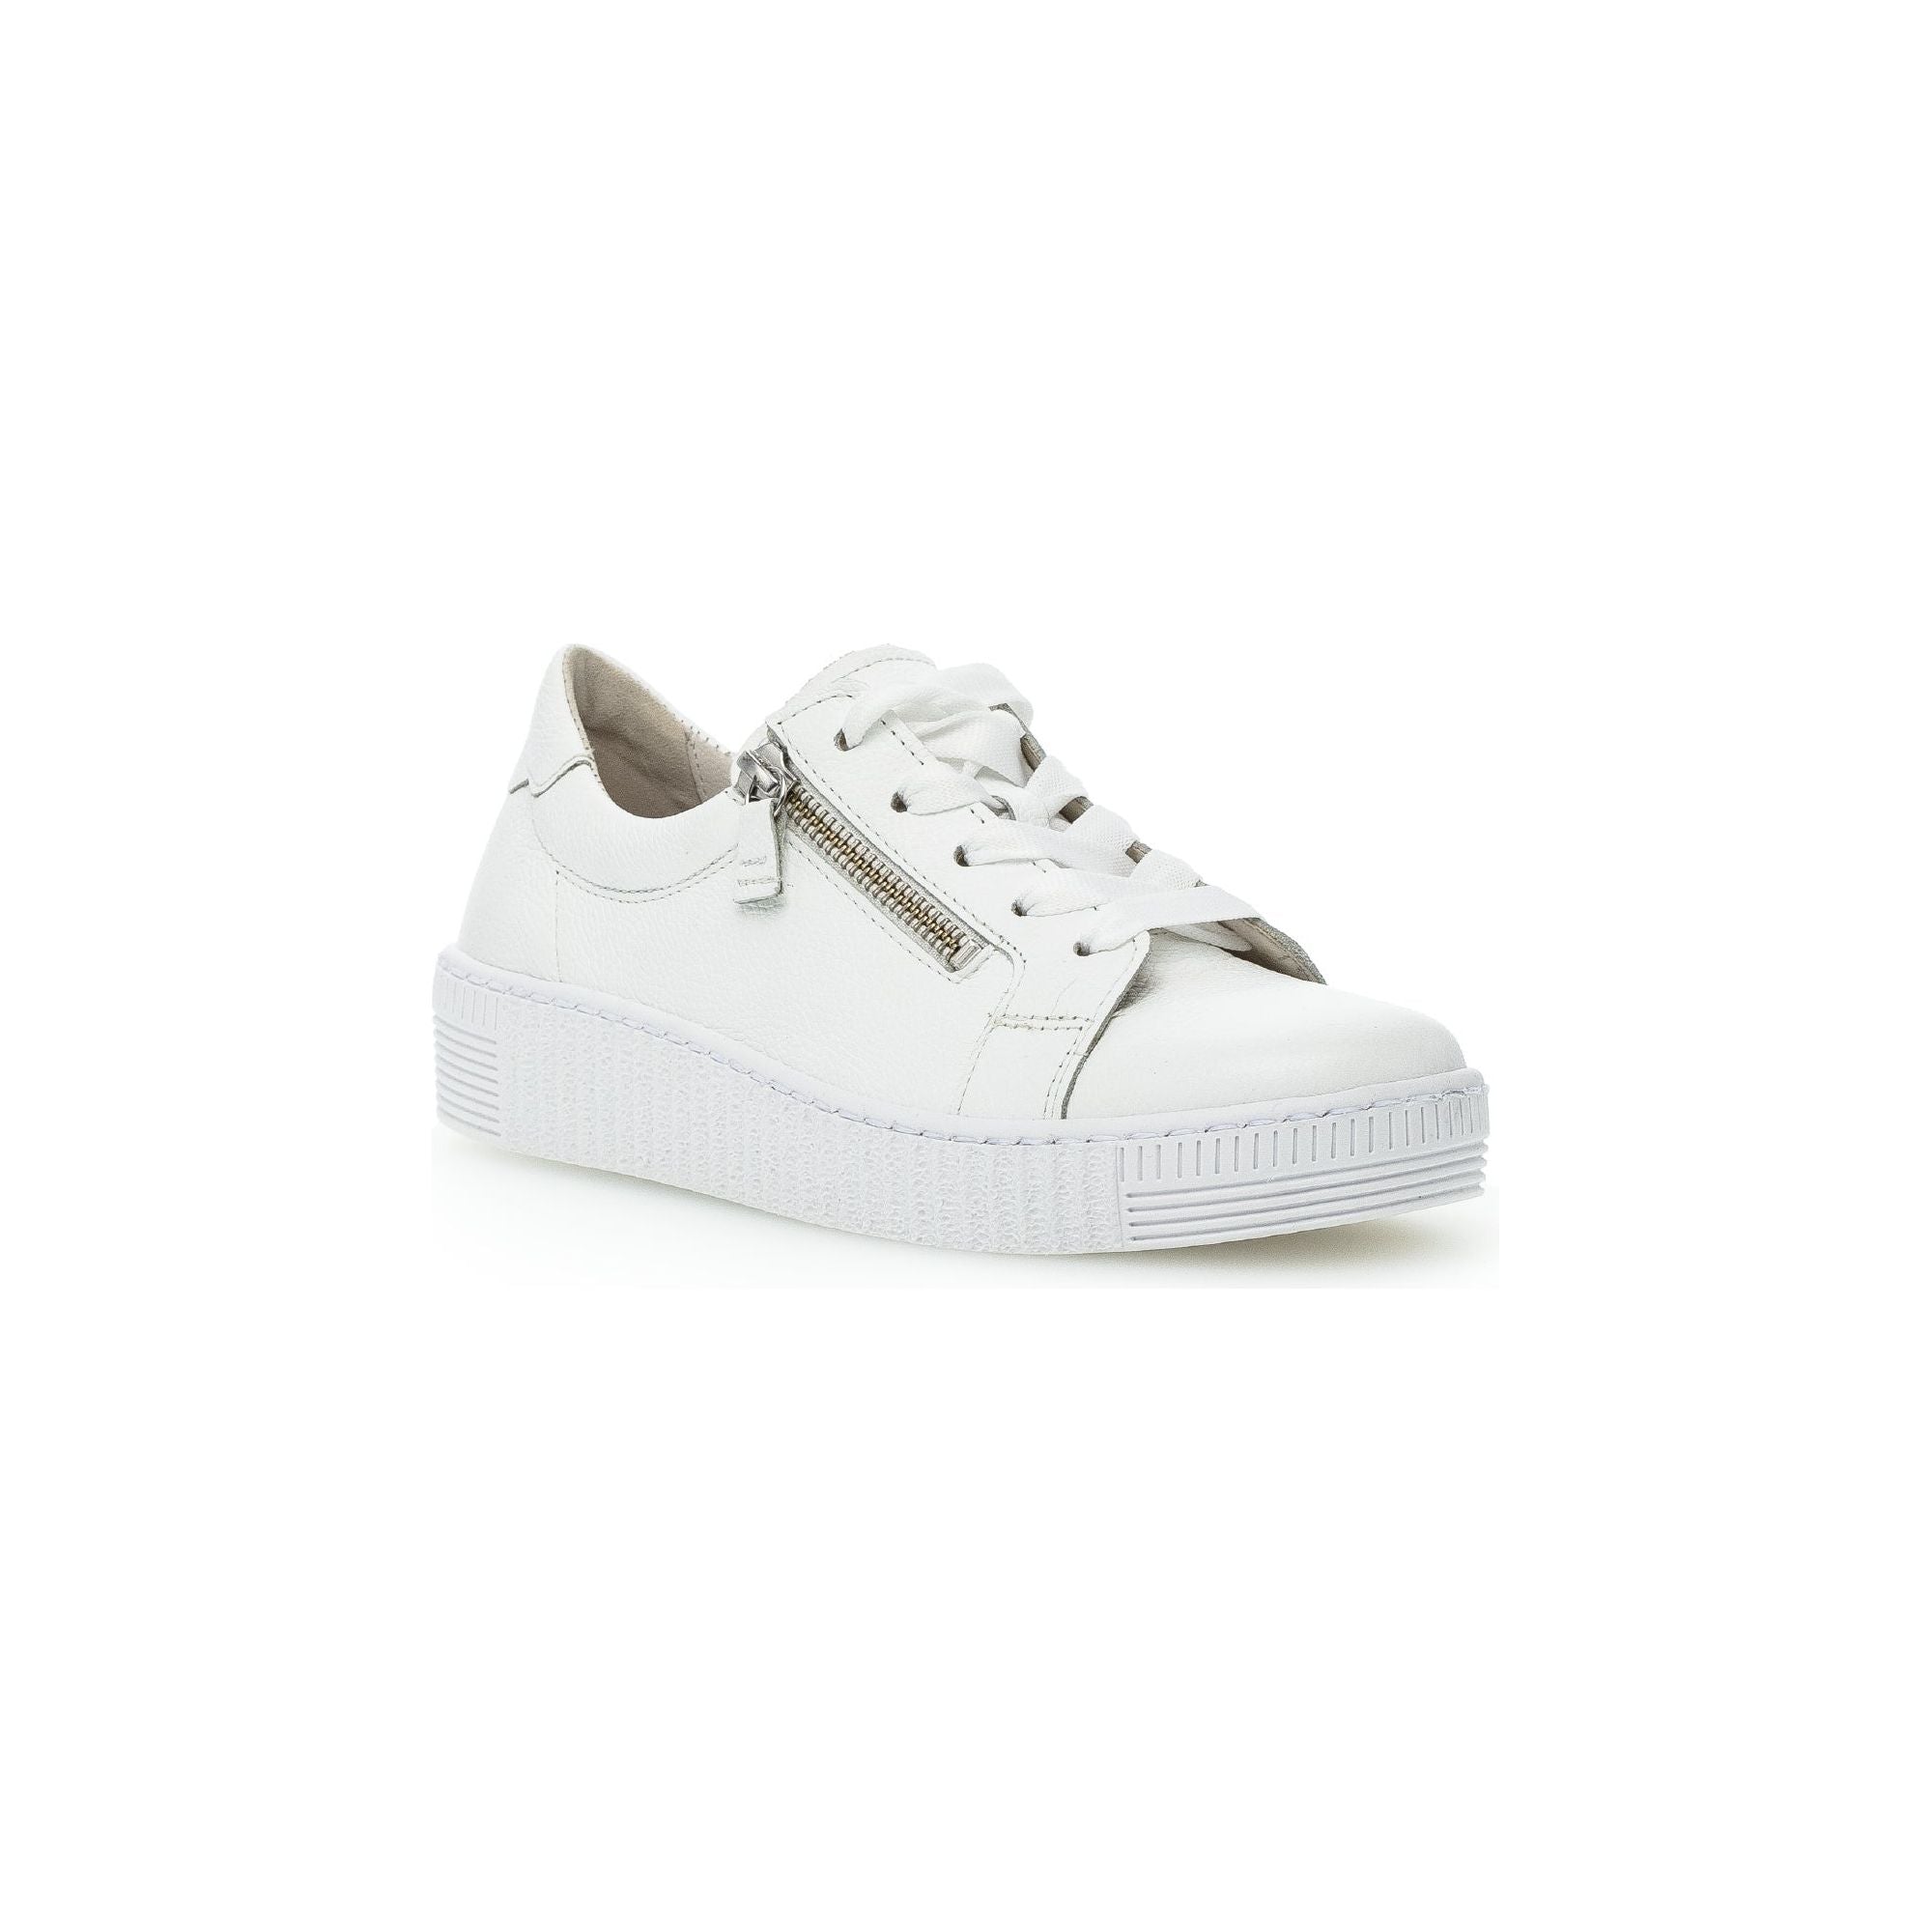 Gabor Wisdom (43.334.21) -  Ladies White Lace Trainer with Double Side Zip in White. Gabor Shoes | Wisemans | Bantry | Shoe Shop | West Cork | Ireland